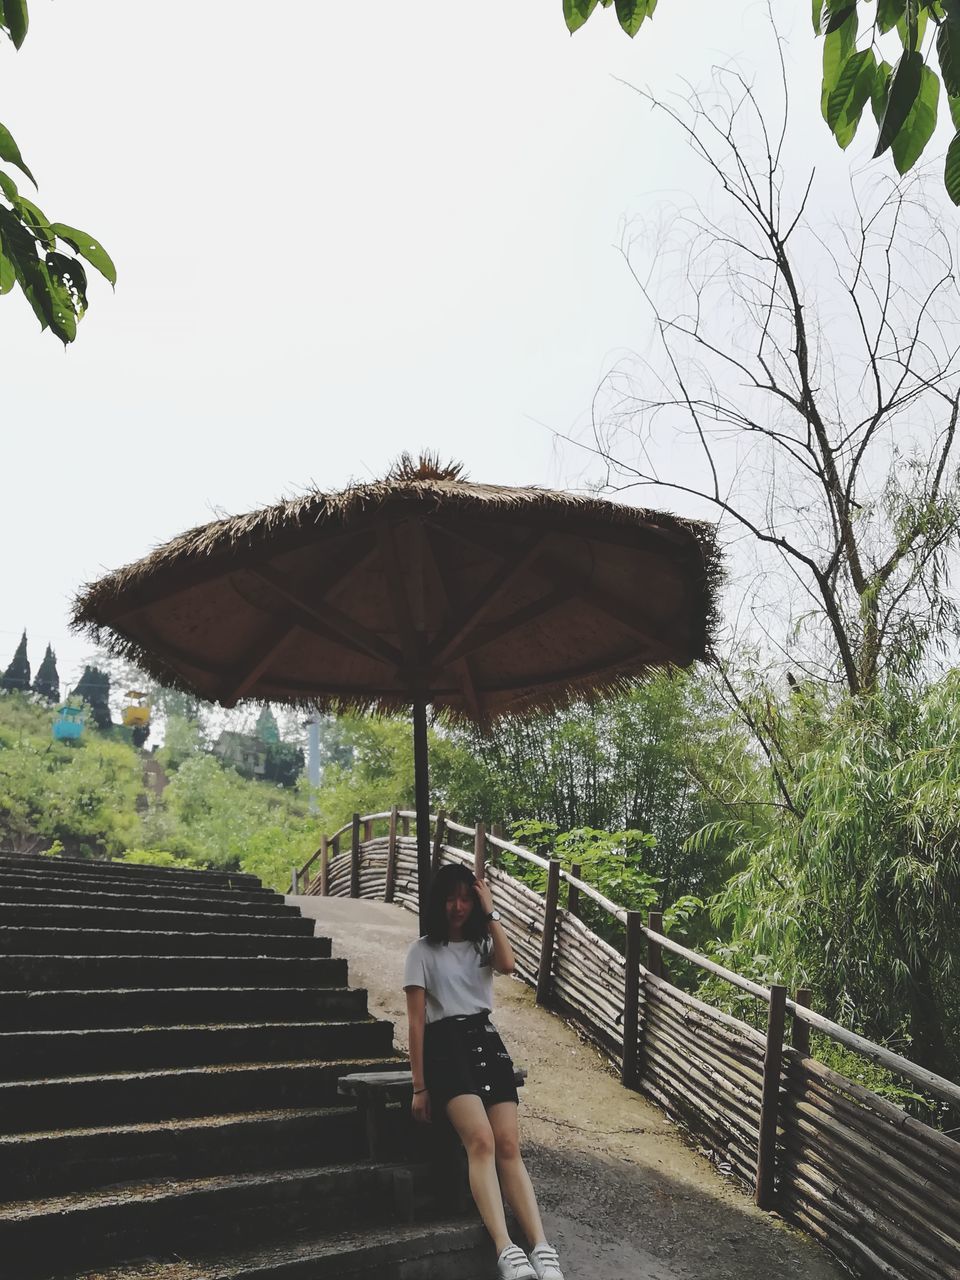 one person, real people, architecture, railing, lifestyles, leisure activity, tree, staircase, women, built structure, full length, umbrella, young women, sky, standing, nature, casual clothing, adult, rear view, steps and staircases, outdoors